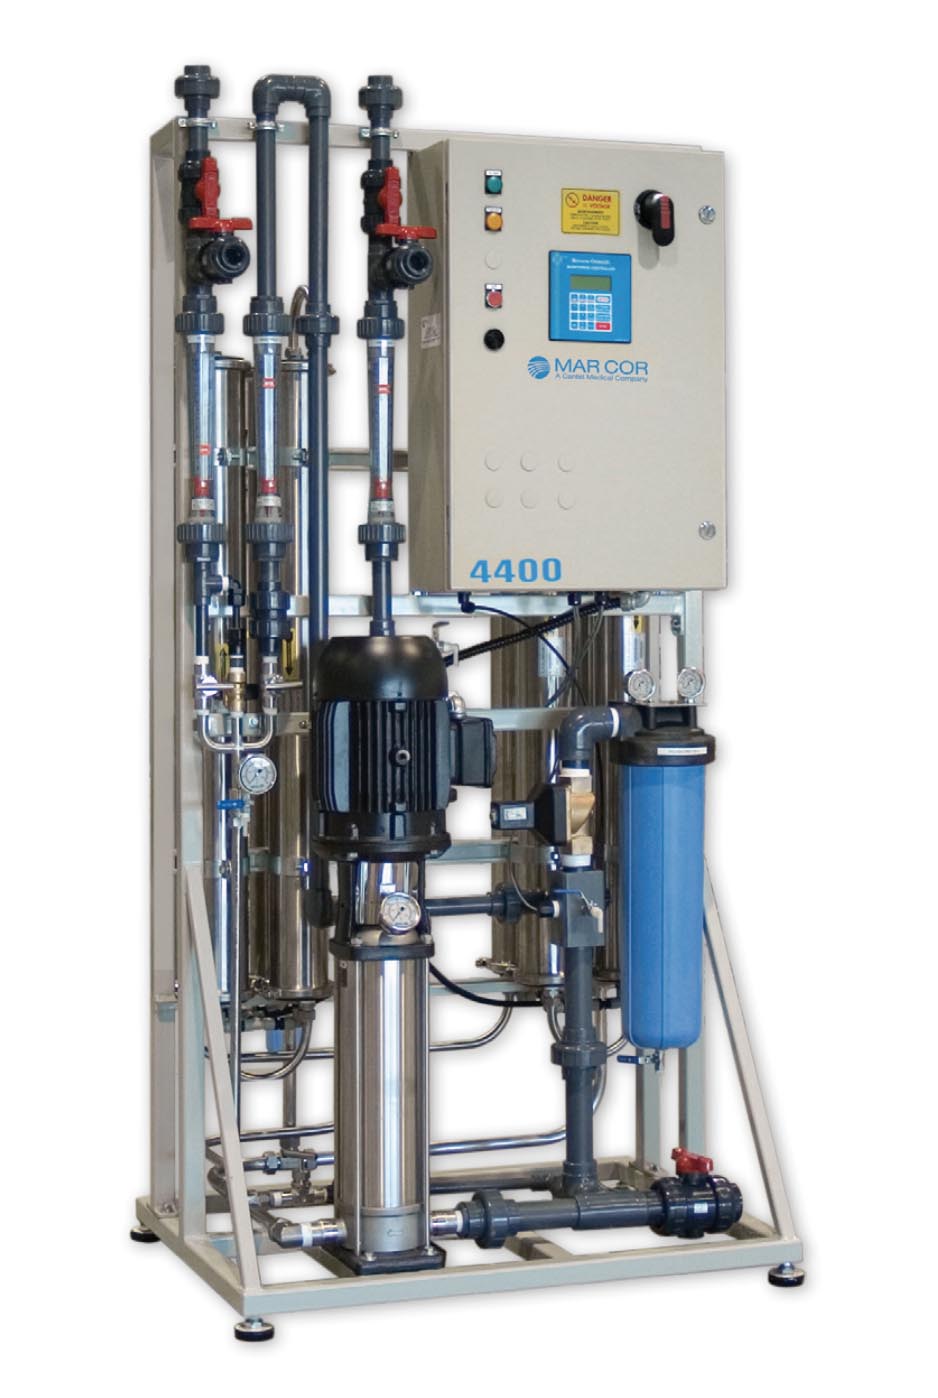 4400M Dialysis Reverse Osmosis System Mar Cor Water, Filtration, & Disinfection Technologies